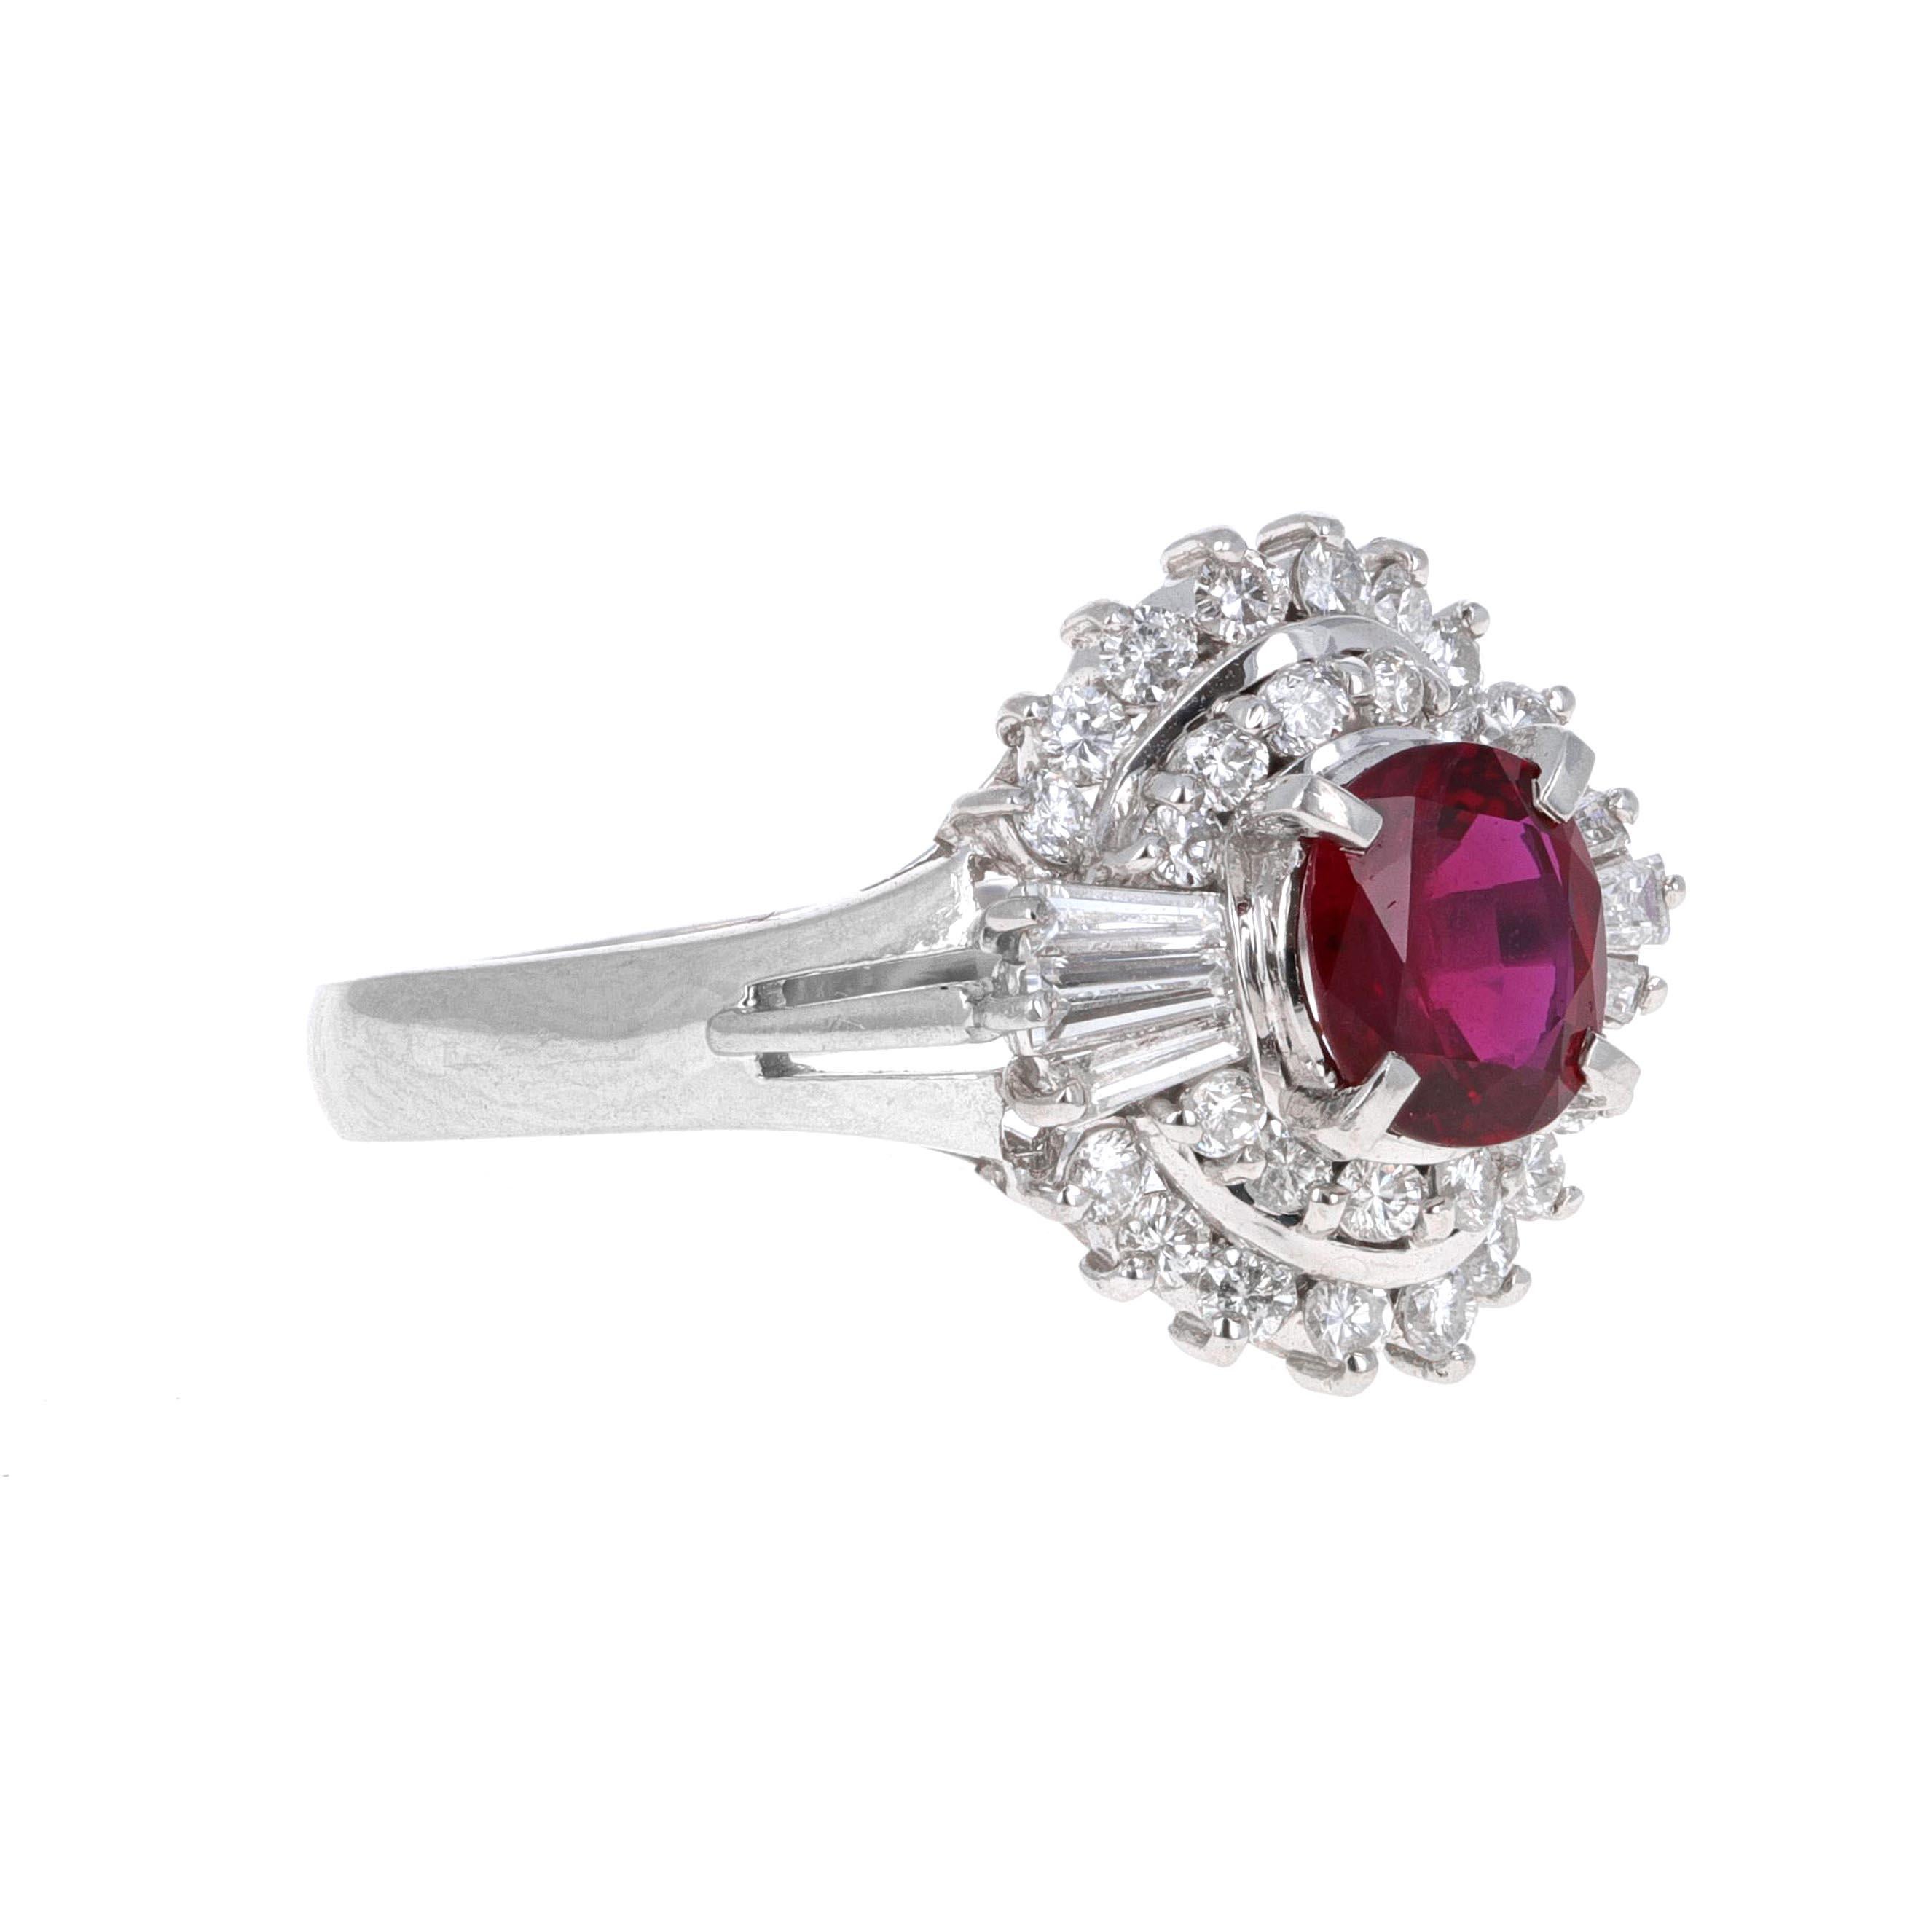 Retro diamond and ruby cocktail ring. The center stone weighs 0.91 carats and is an oval shape. Surrounding the ruby are round and tapered baguett diamonds. There is a total carat weight of 0.61 carats in diamonds. The ring is made in platinum and